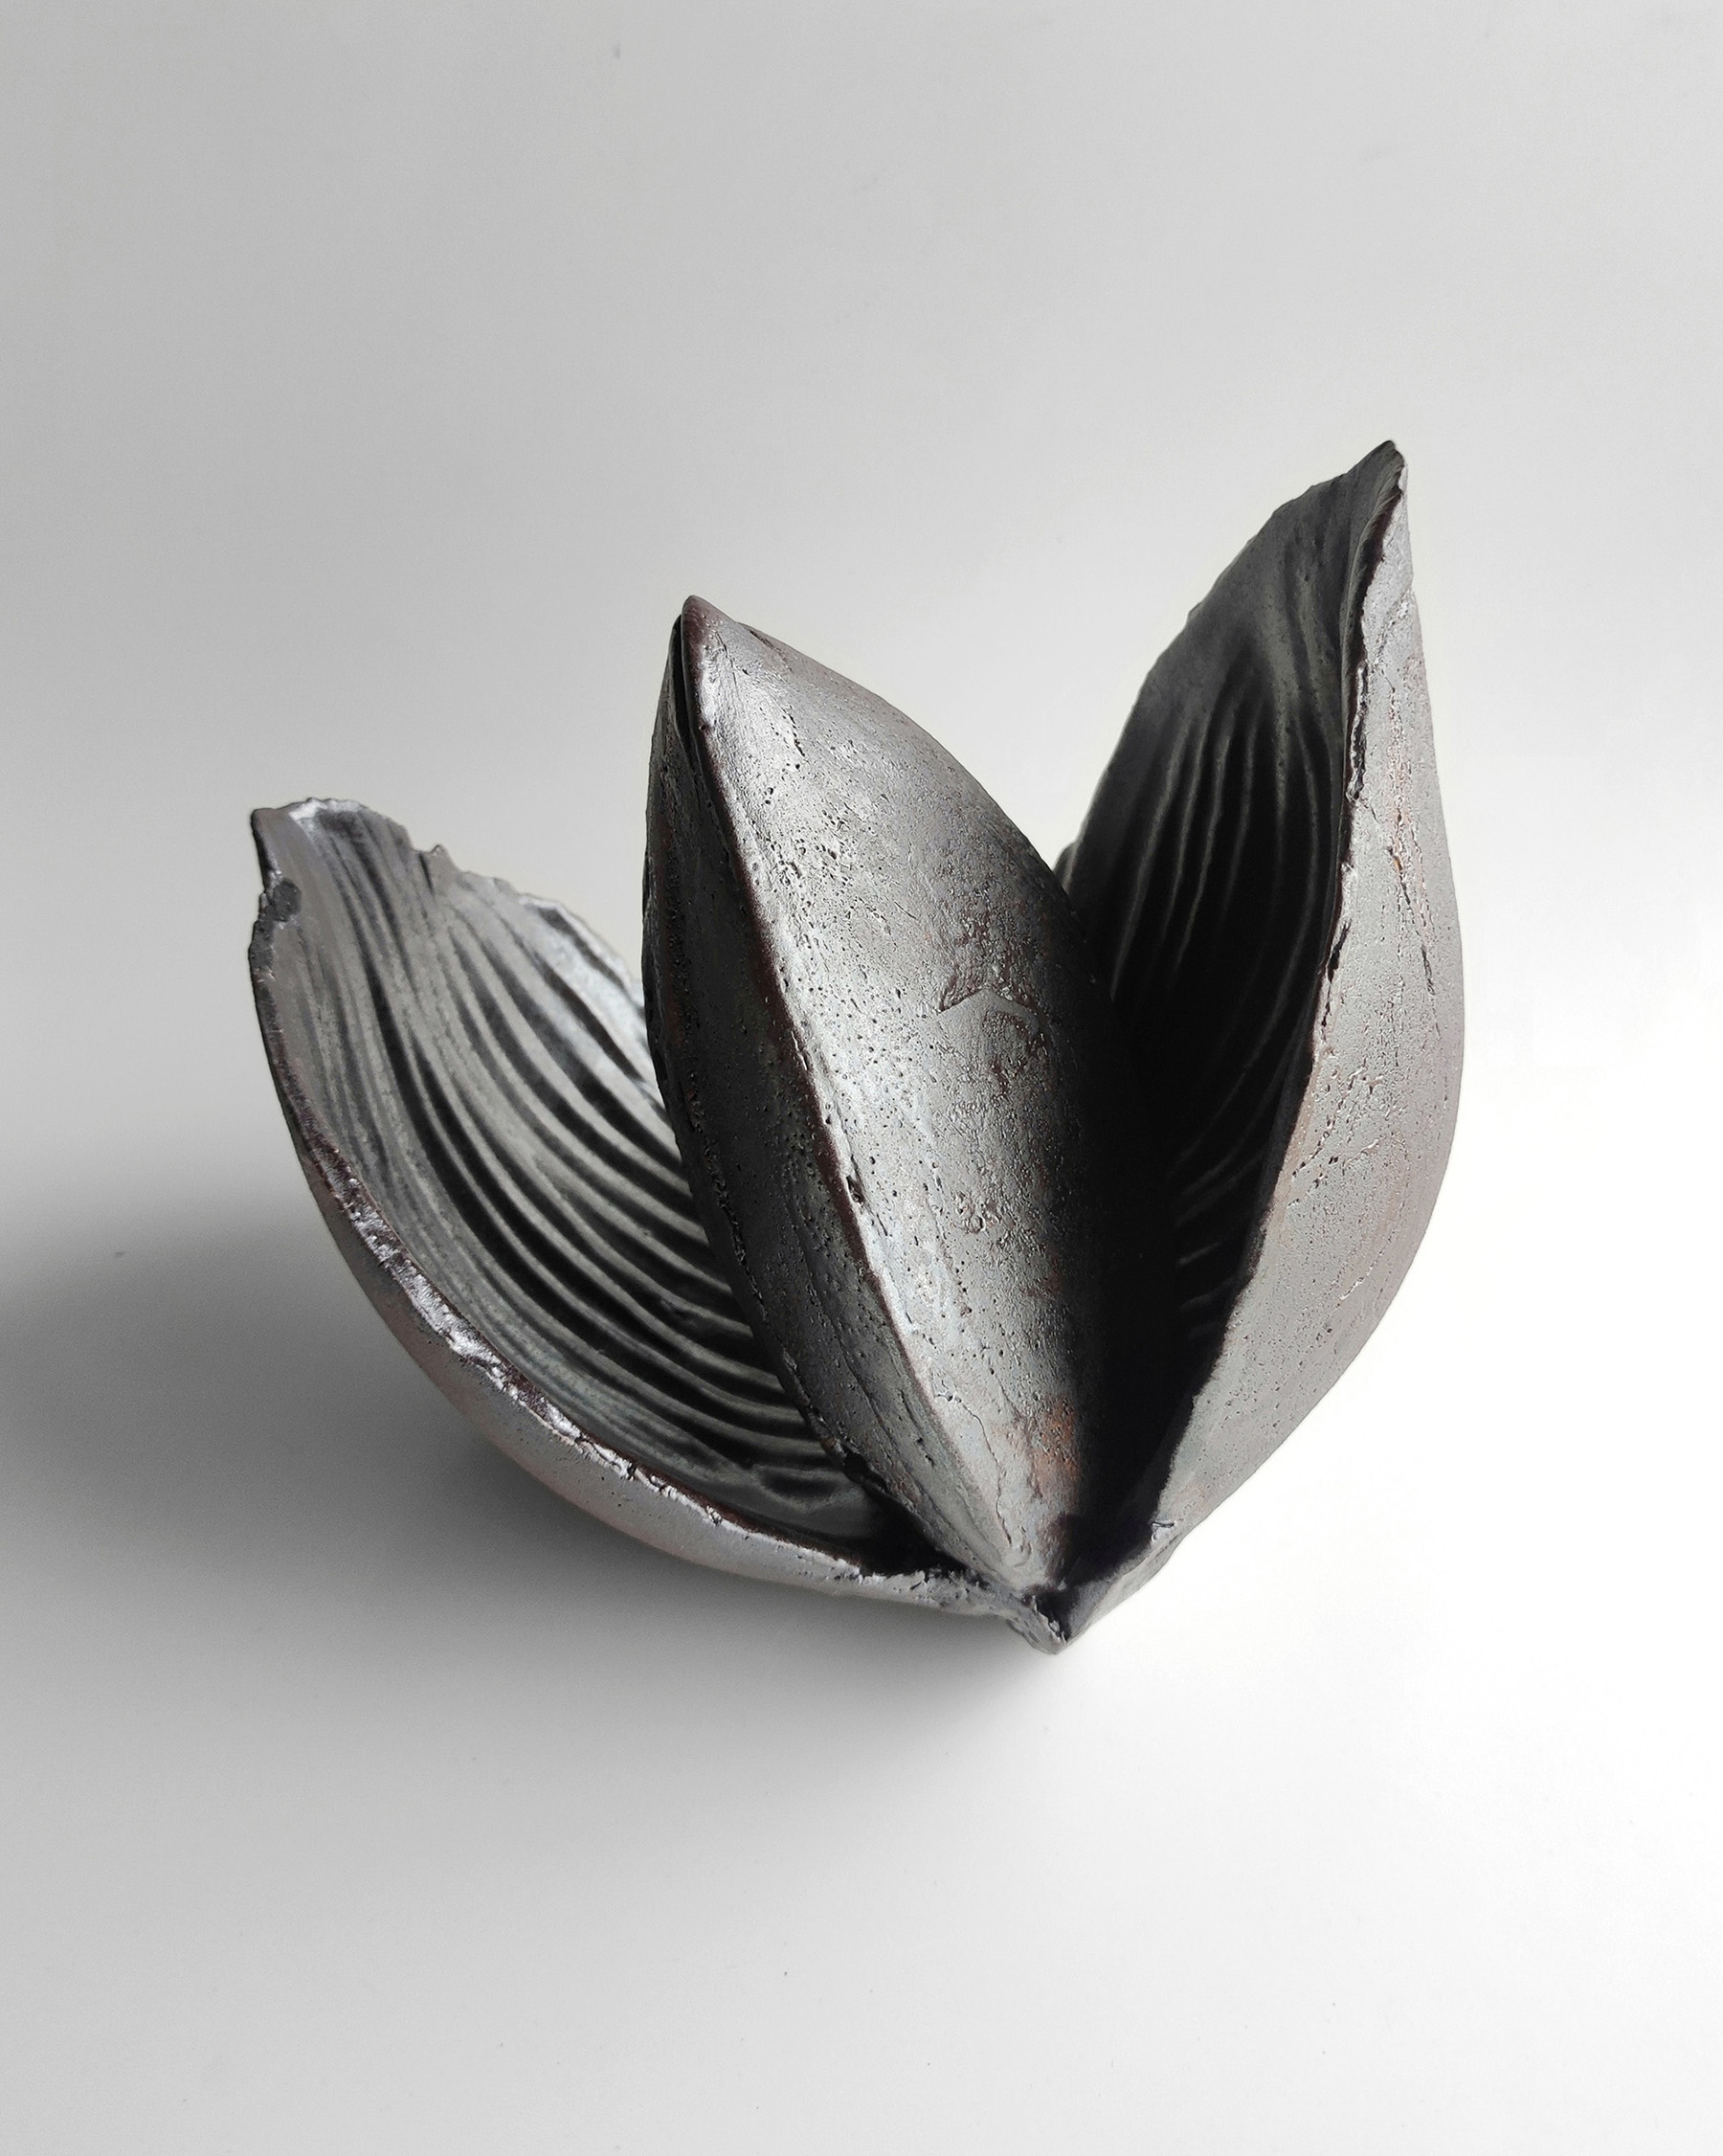 PATRICIA VAREA MILÁN: from archeology and research to contemporary artisan ceramics